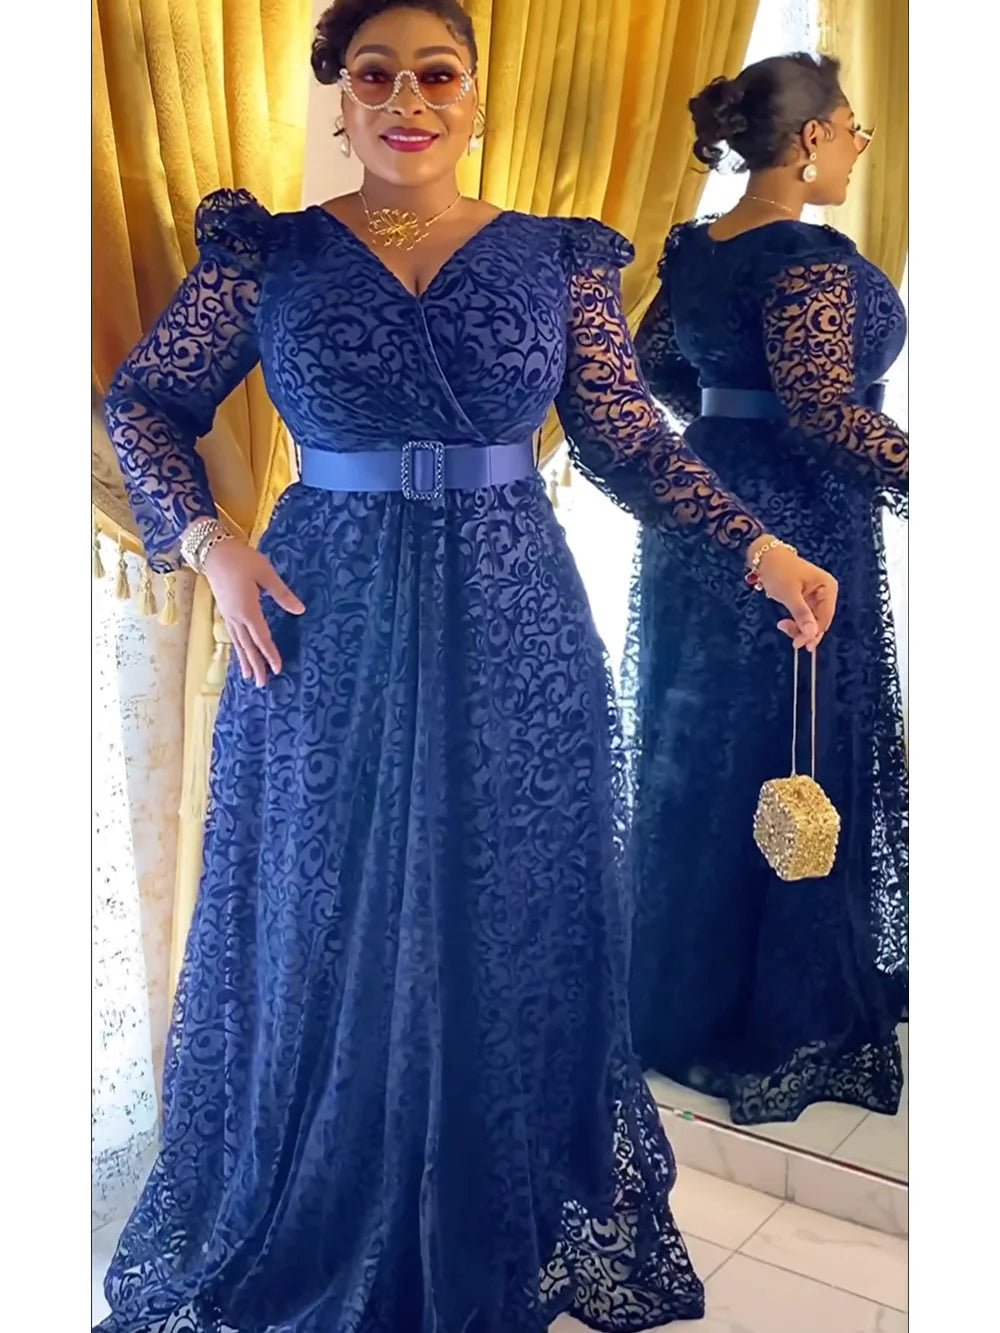 Elegant Maxi Dashiki Lace Wedding Gowns: Plus Size African Party Dresses for Women's Fashion - Flexi Africa - Flexi Africa offers Free Delivery Worldwide - Vibrant African traditional clothing showcasing bold prints and intricate designs